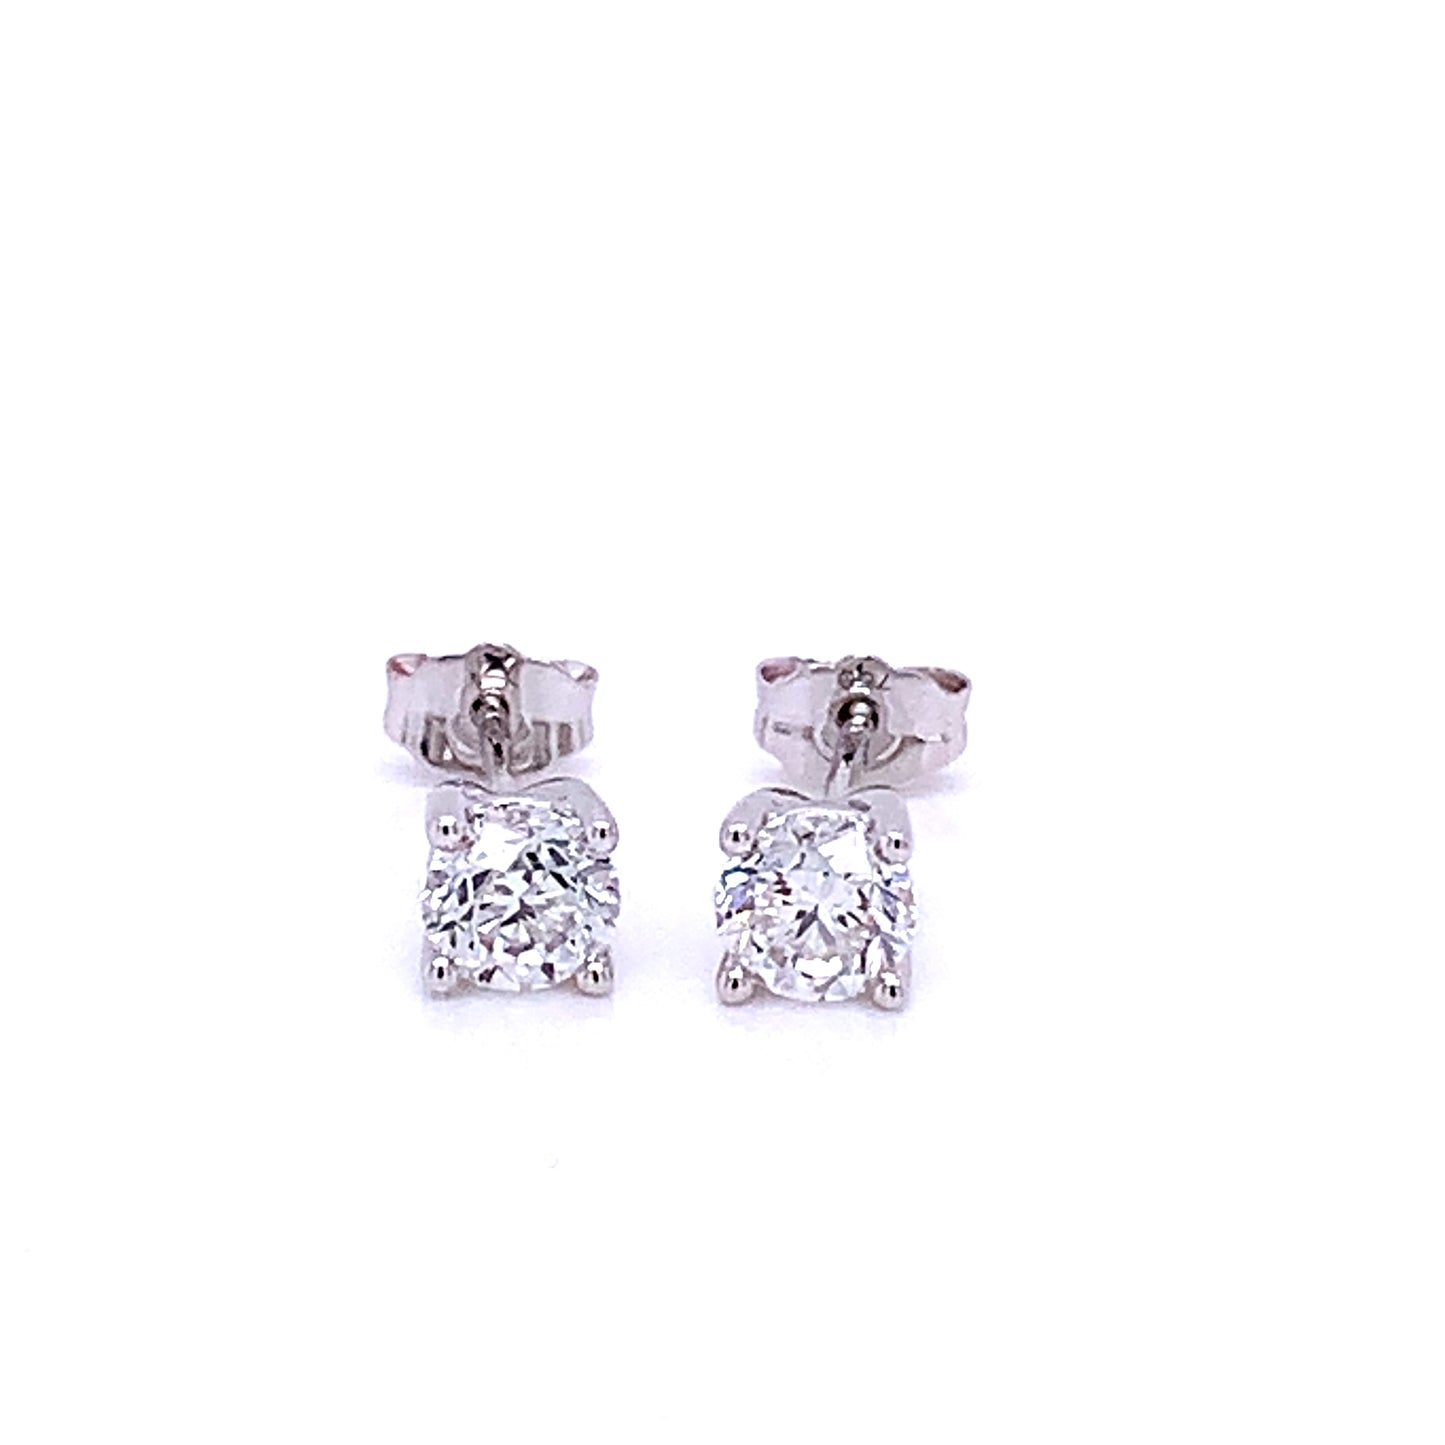 Round Brilliant Cut Diamond Solitaire Earrings  Gardiner Brothers   